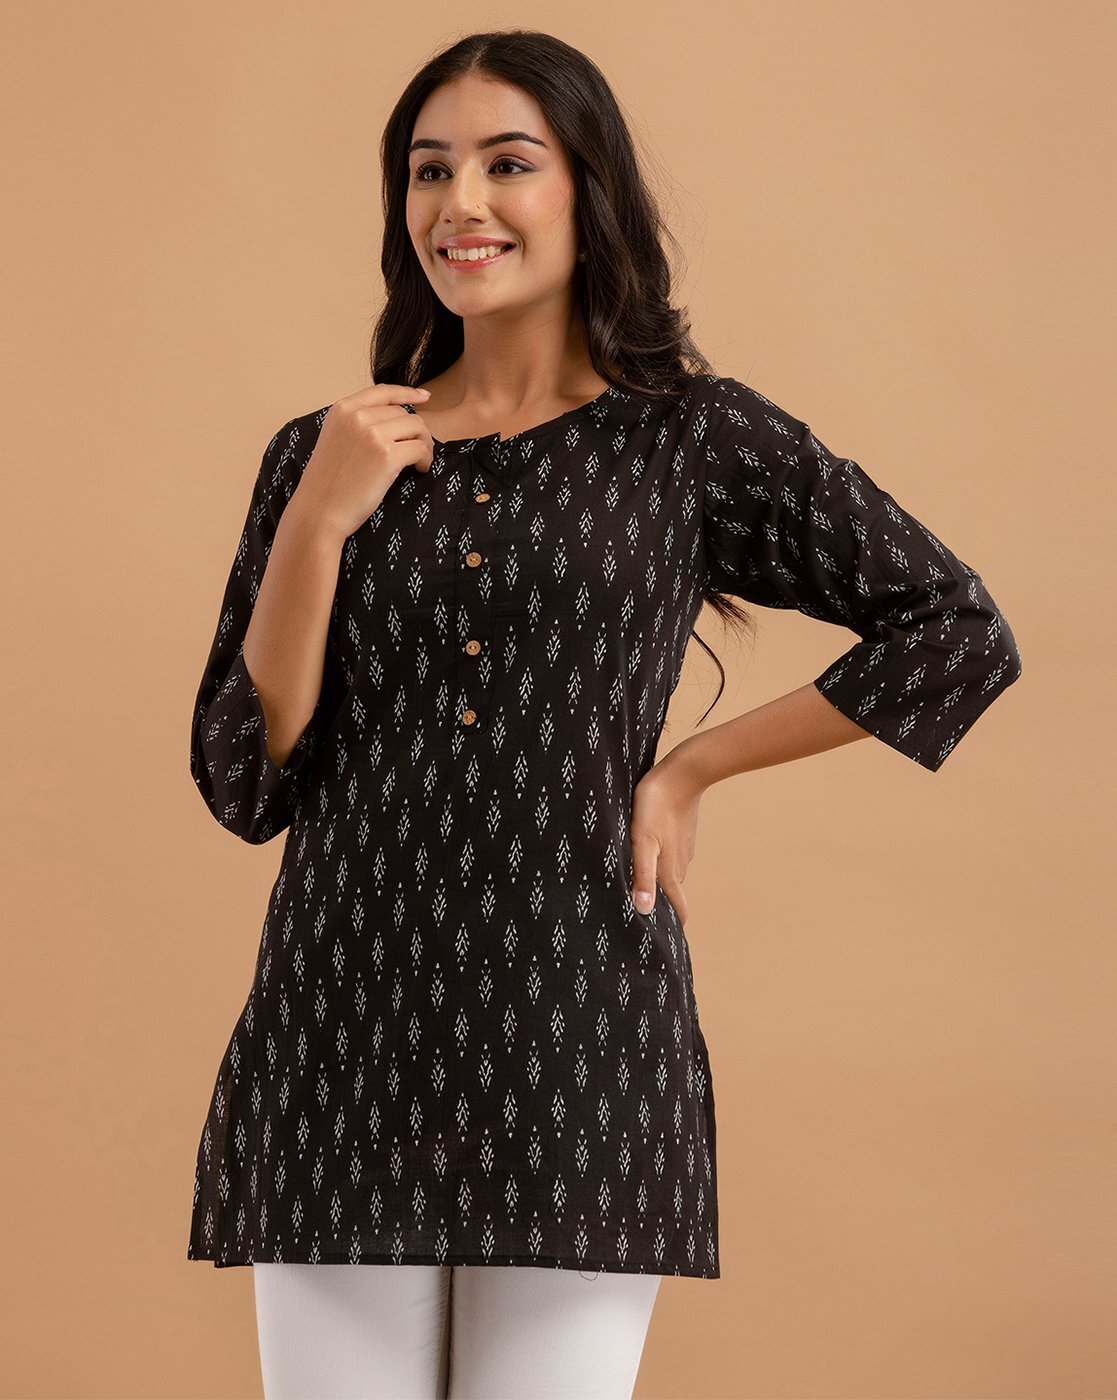 Black Color Cotton Fabric 3/4th Sleeves V-Neck Casual Short Kurti